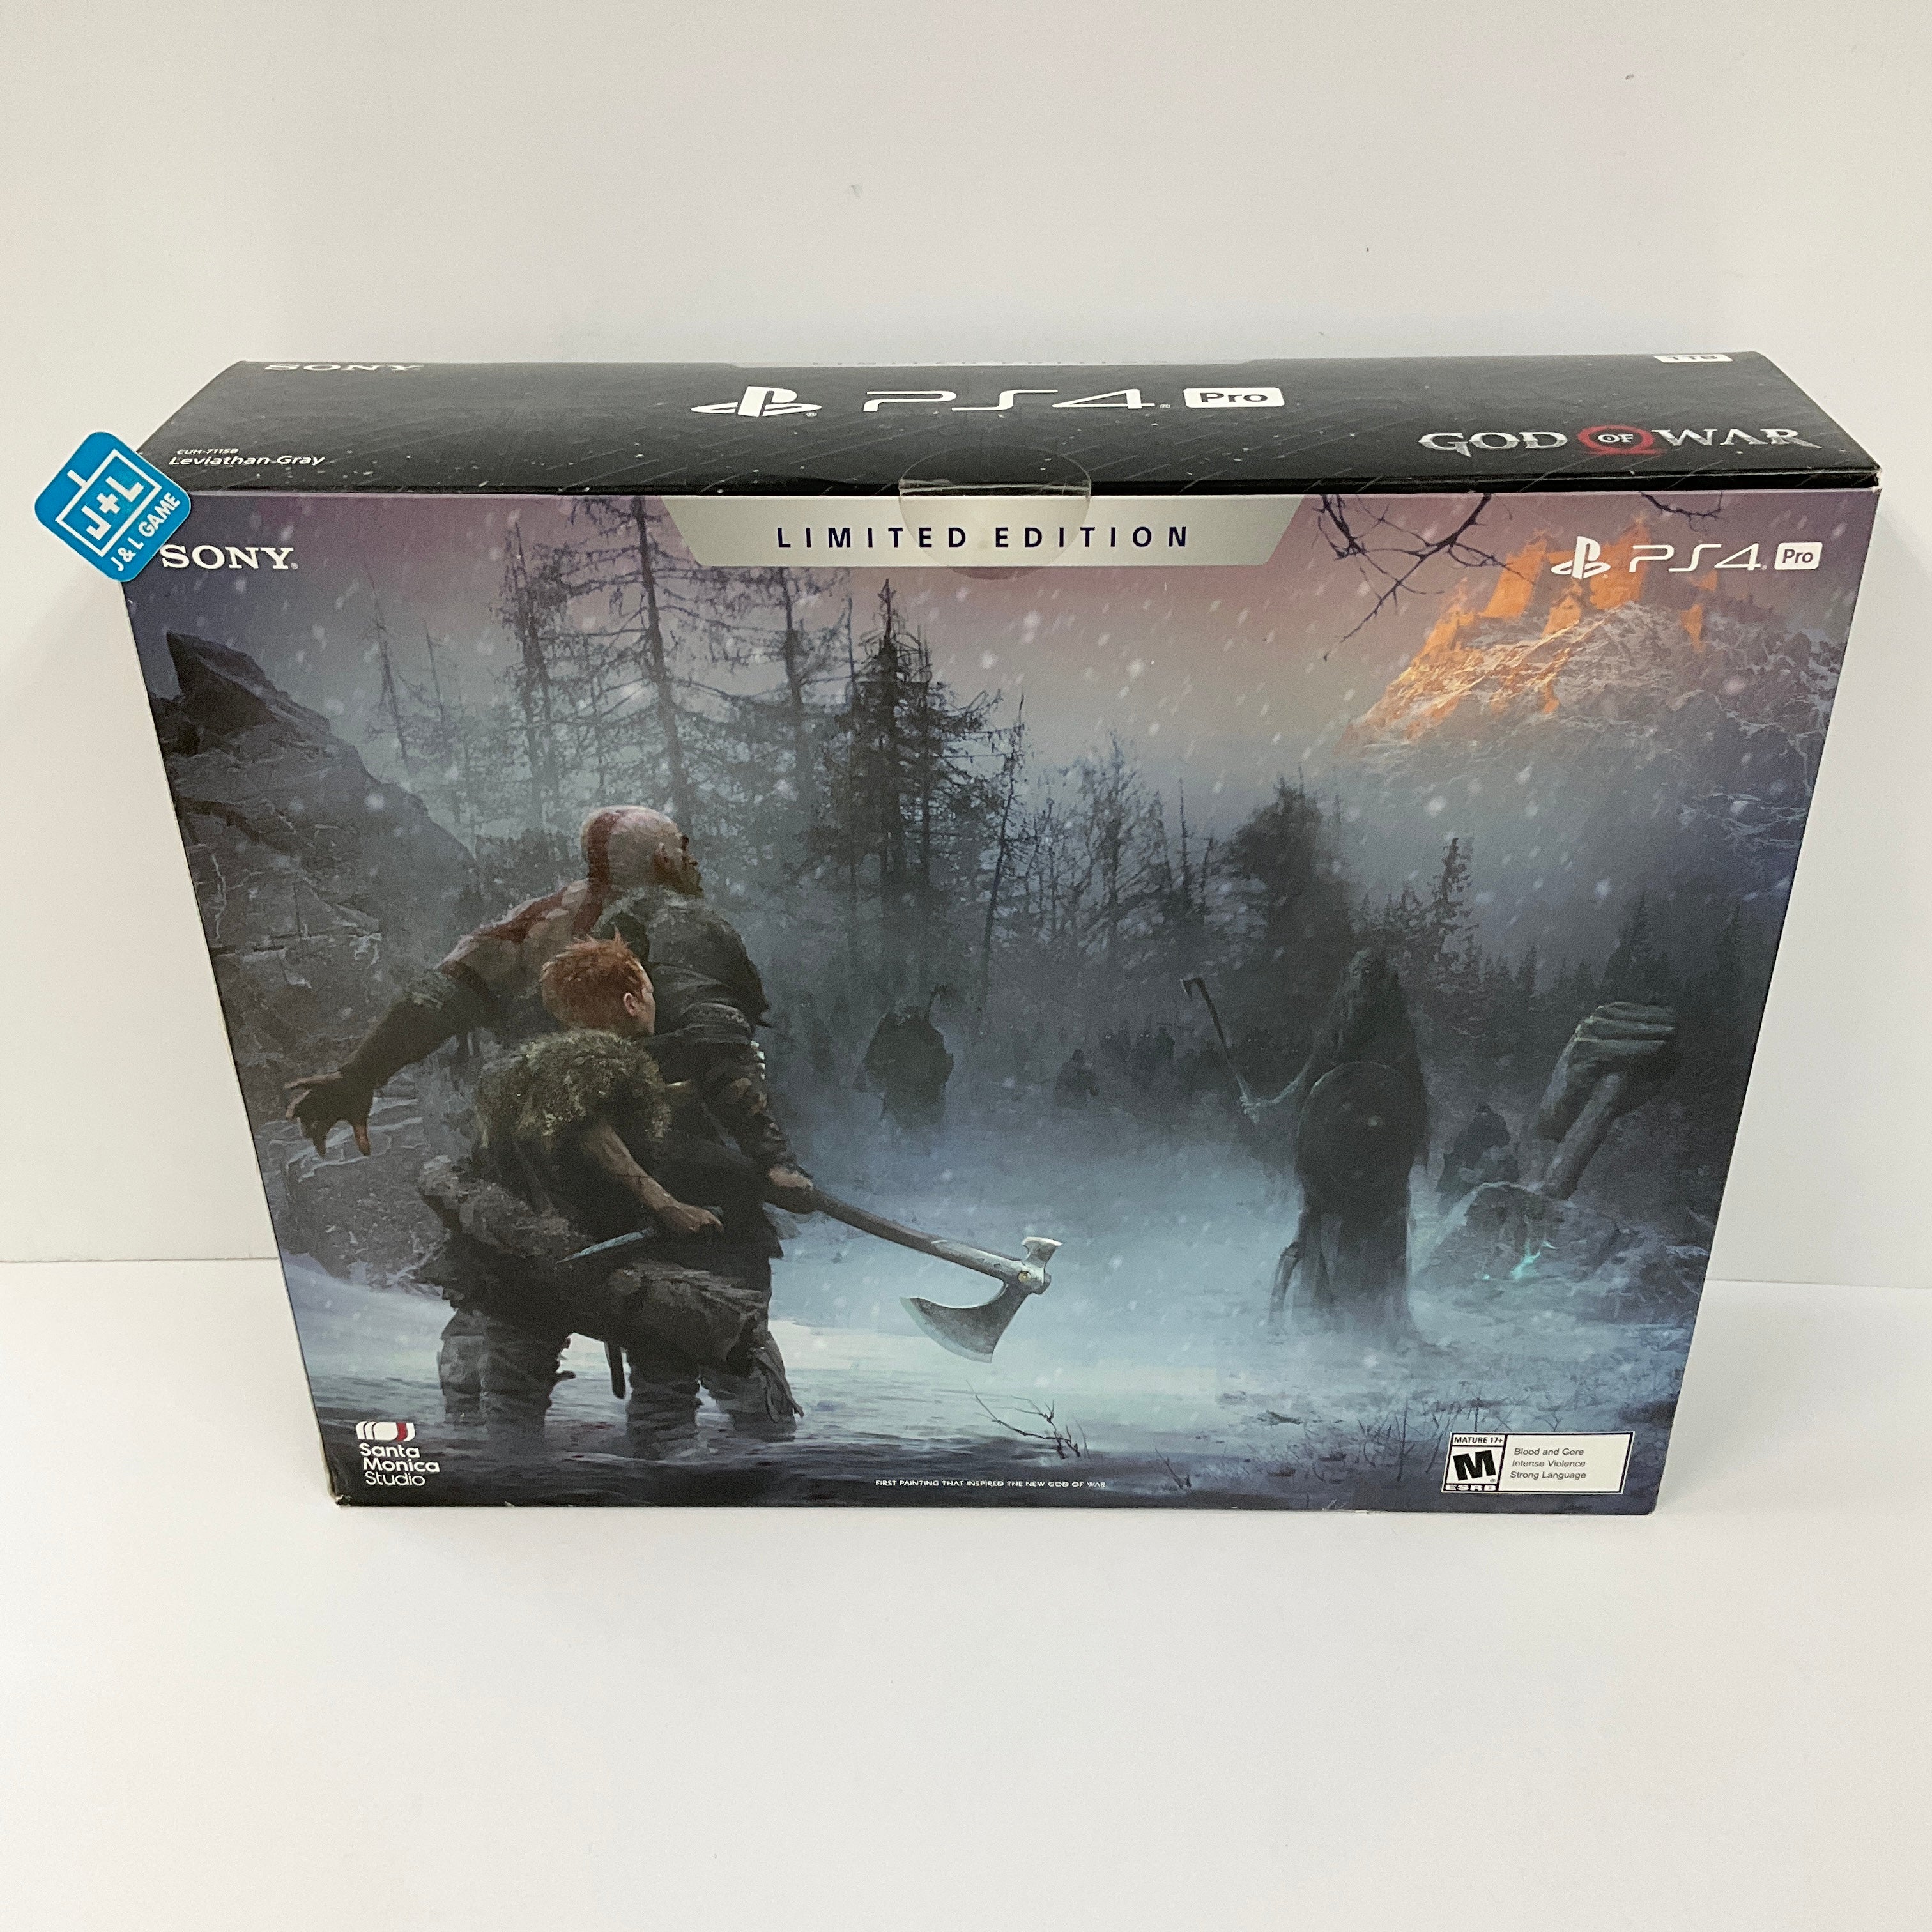 Sony PlayStation 4 Pro 1TB Limited Edition Console - God of War Bundle (US) - (PS4) Playstation 4 Consoles Sony   